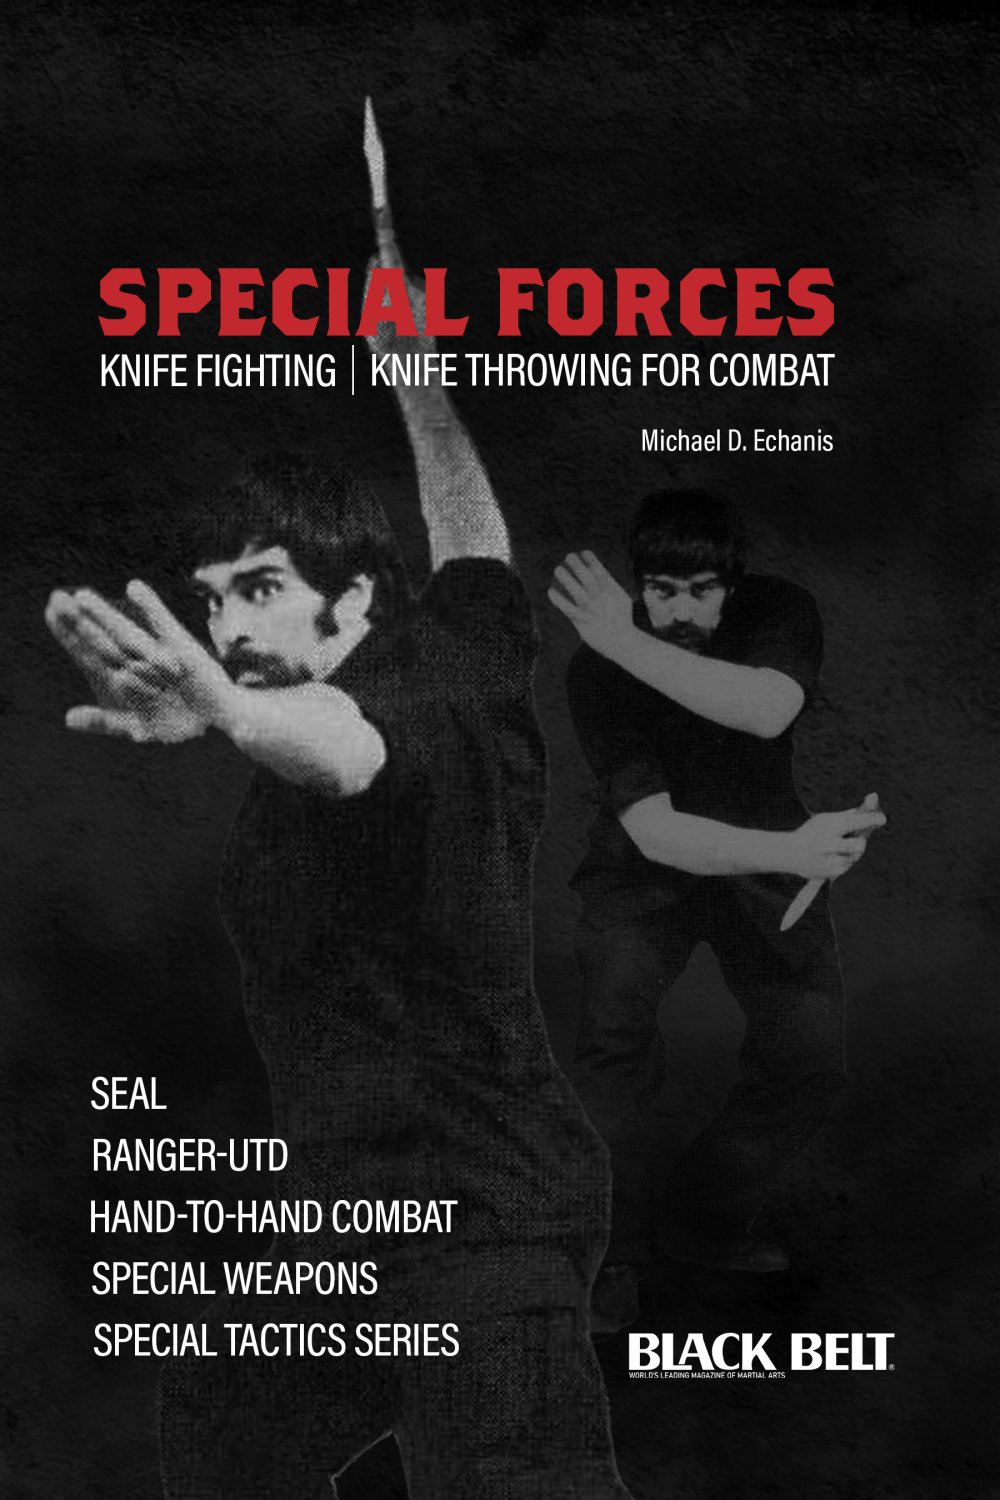 BR5090A-BD DIGITAL E-BOOK Special Forces Knife Fighting & Throwing for Combat - Michael Enchanis